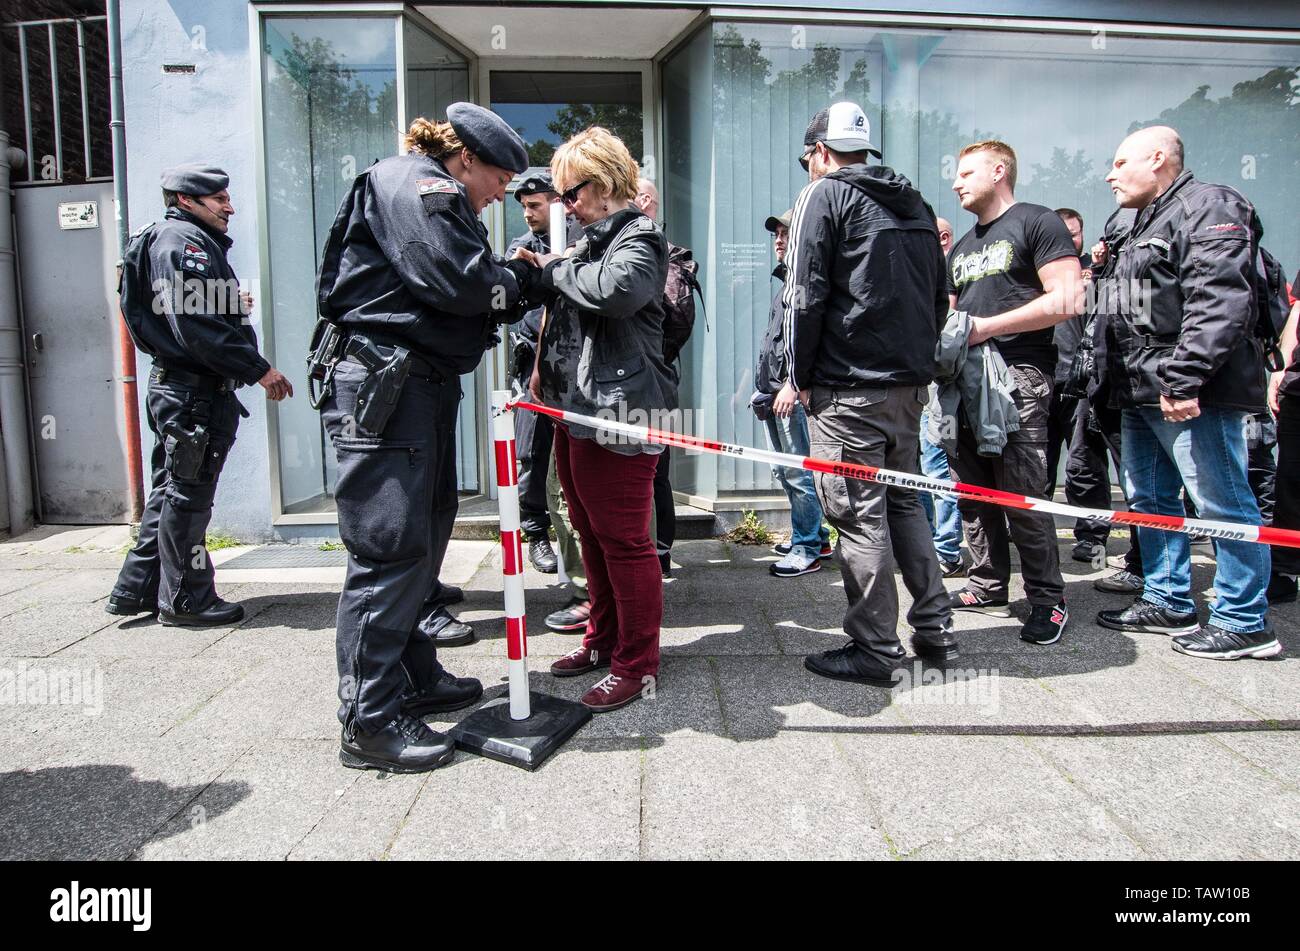 Dortmund, Nordrhein Westfalen, Germany. 25th May, 2019. Neonazis in Dortmund, Germany arrive for a demonstration where there were checks by police commandos for weapons and contraband. Prior to the European Elections, the neonazi party Die Rechte (The Right) organized a rally in the German city of Dortmund to promote their candidate, the incarcerated Holocaust denier Ursula Haverbeck. The demonstration and march were organized by prominent local political figure and neonazi activist Michael Brueck (Michael BrÃ¼ck) who enlisted the help of not only German neonazis, but also assistance from Ru Stock Photo